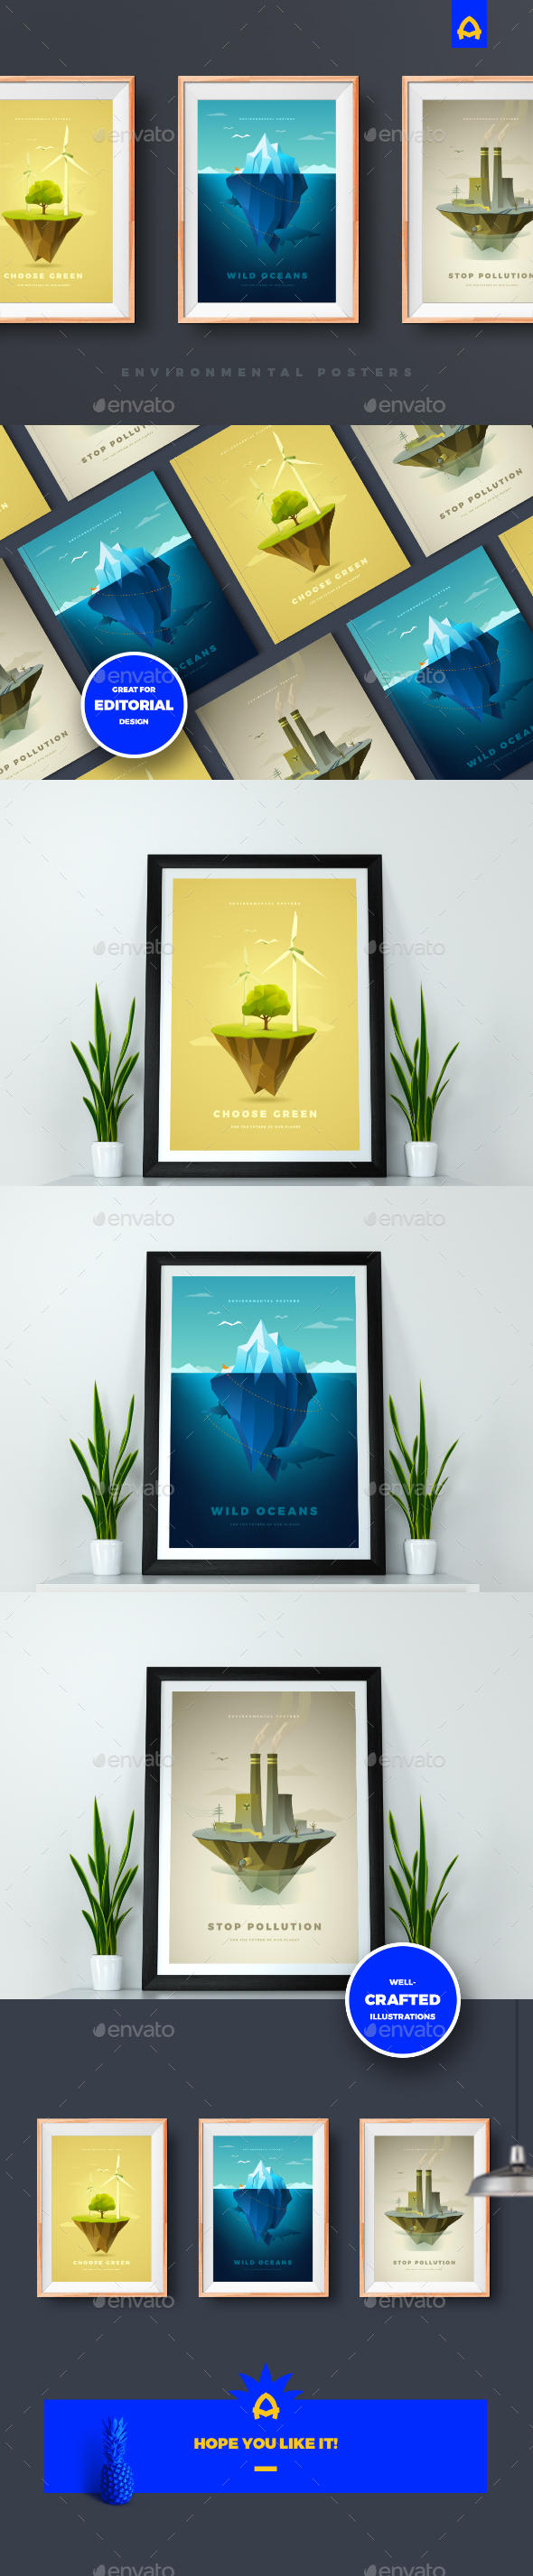 GraphicRiver Environmental Posters 20516330